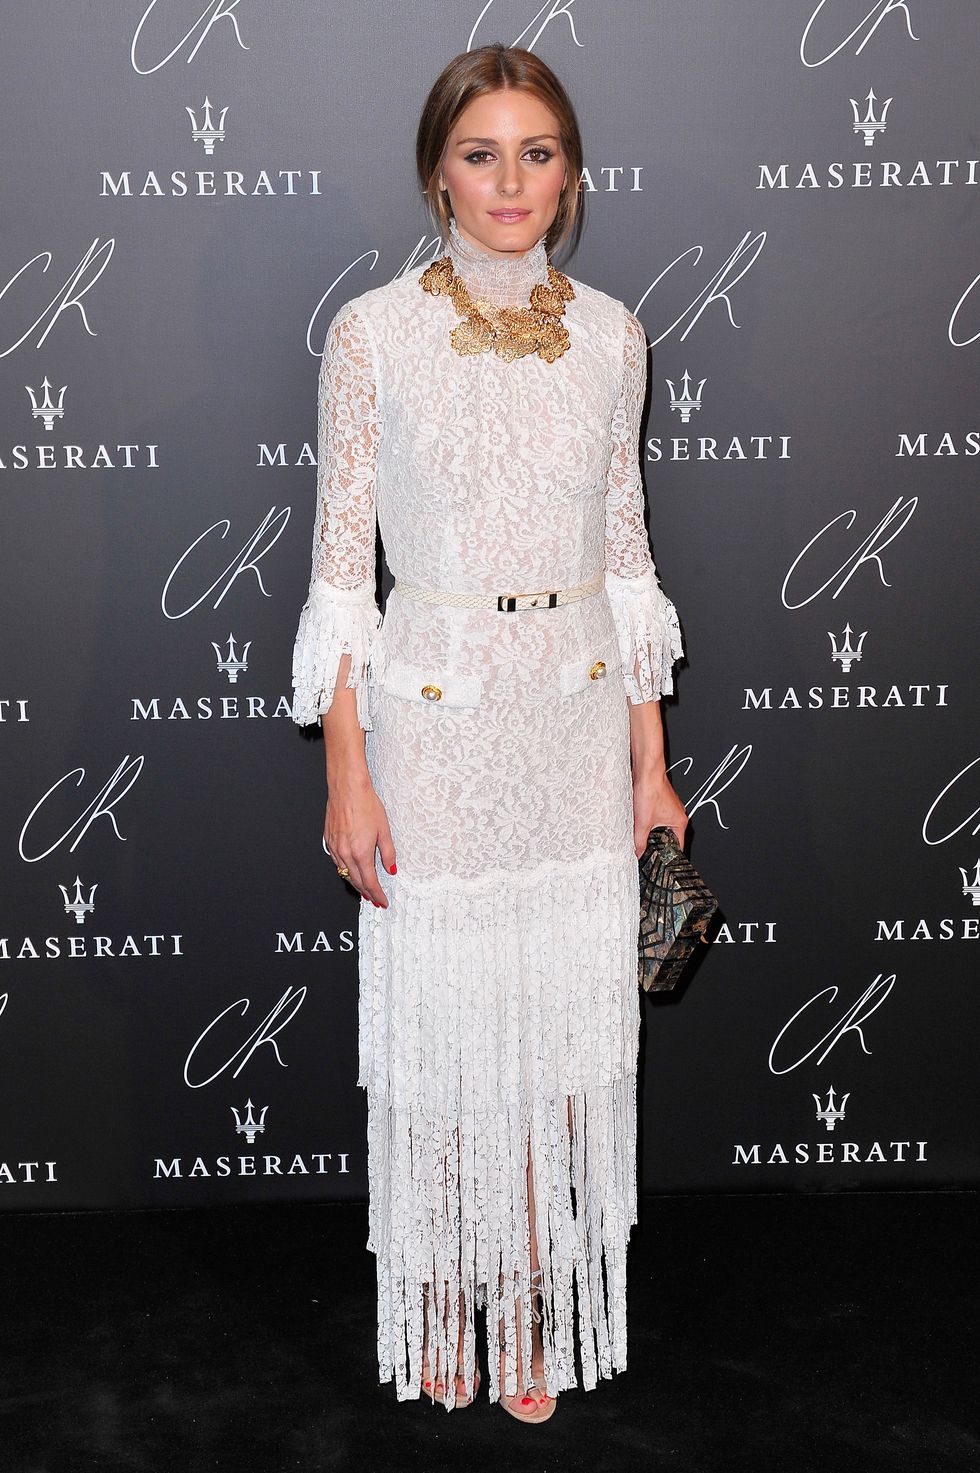 Olivia Palermo in a white lace dress for CR Fashion Book launch